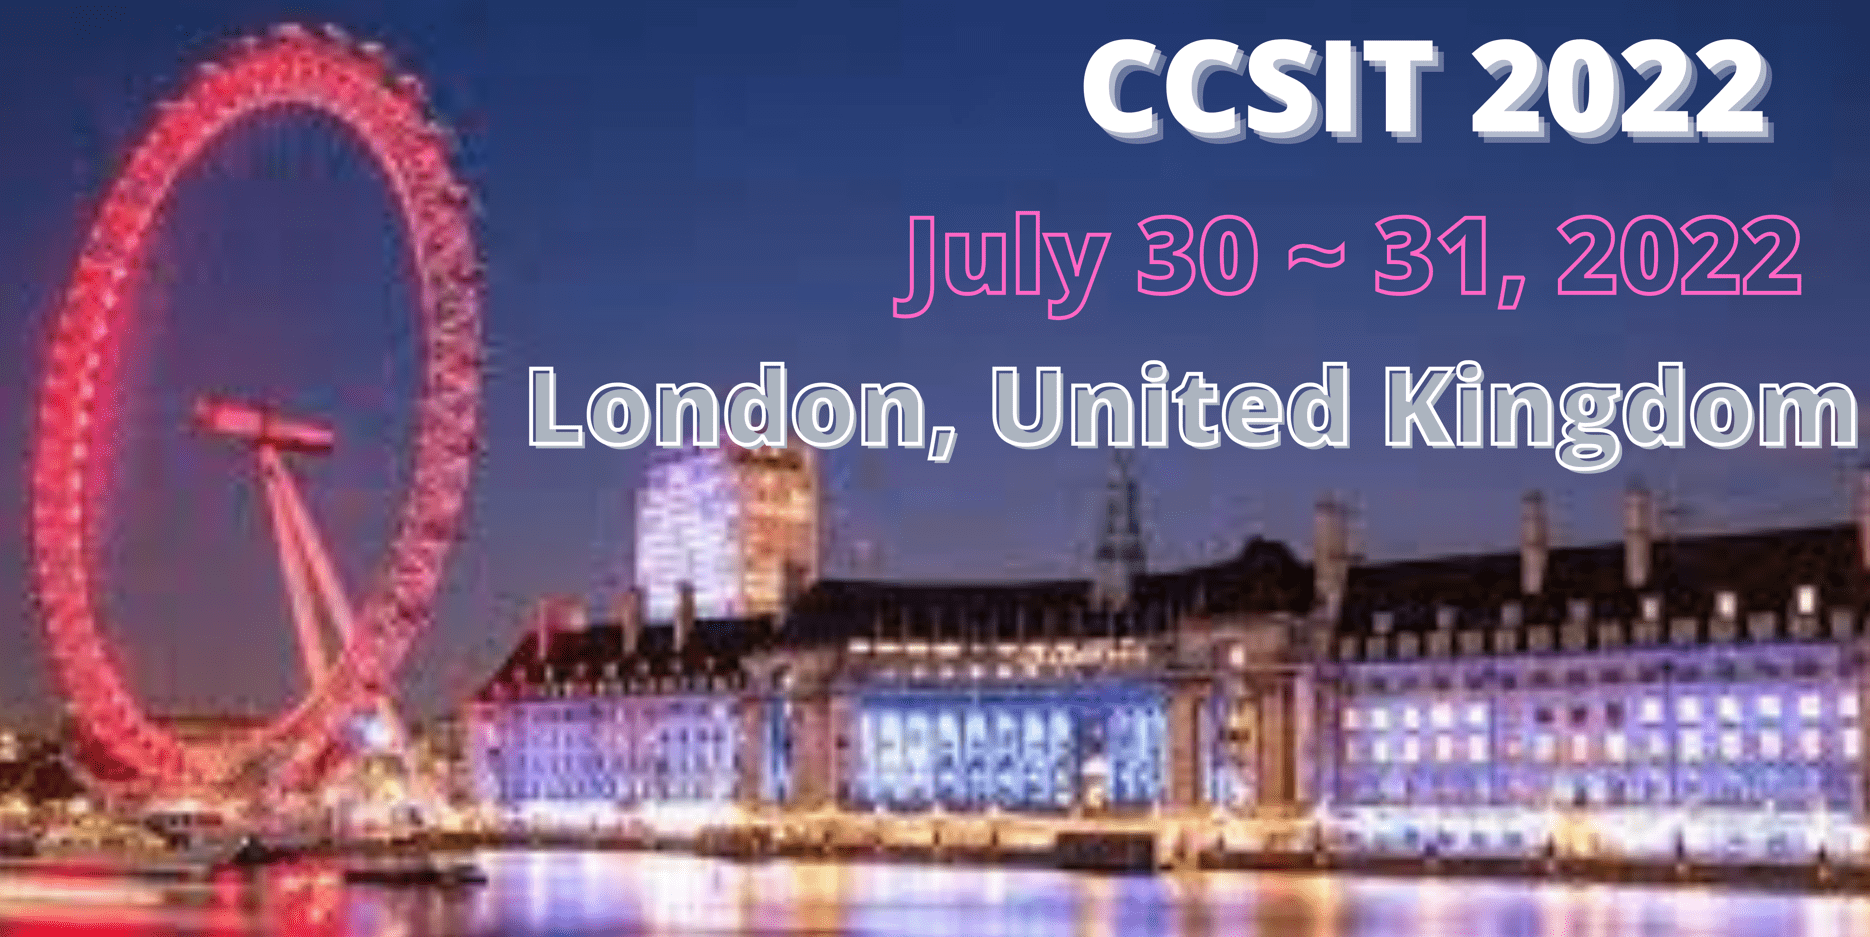 12th International Conference on Computer Science and Information Technology (CCSIT 2022)